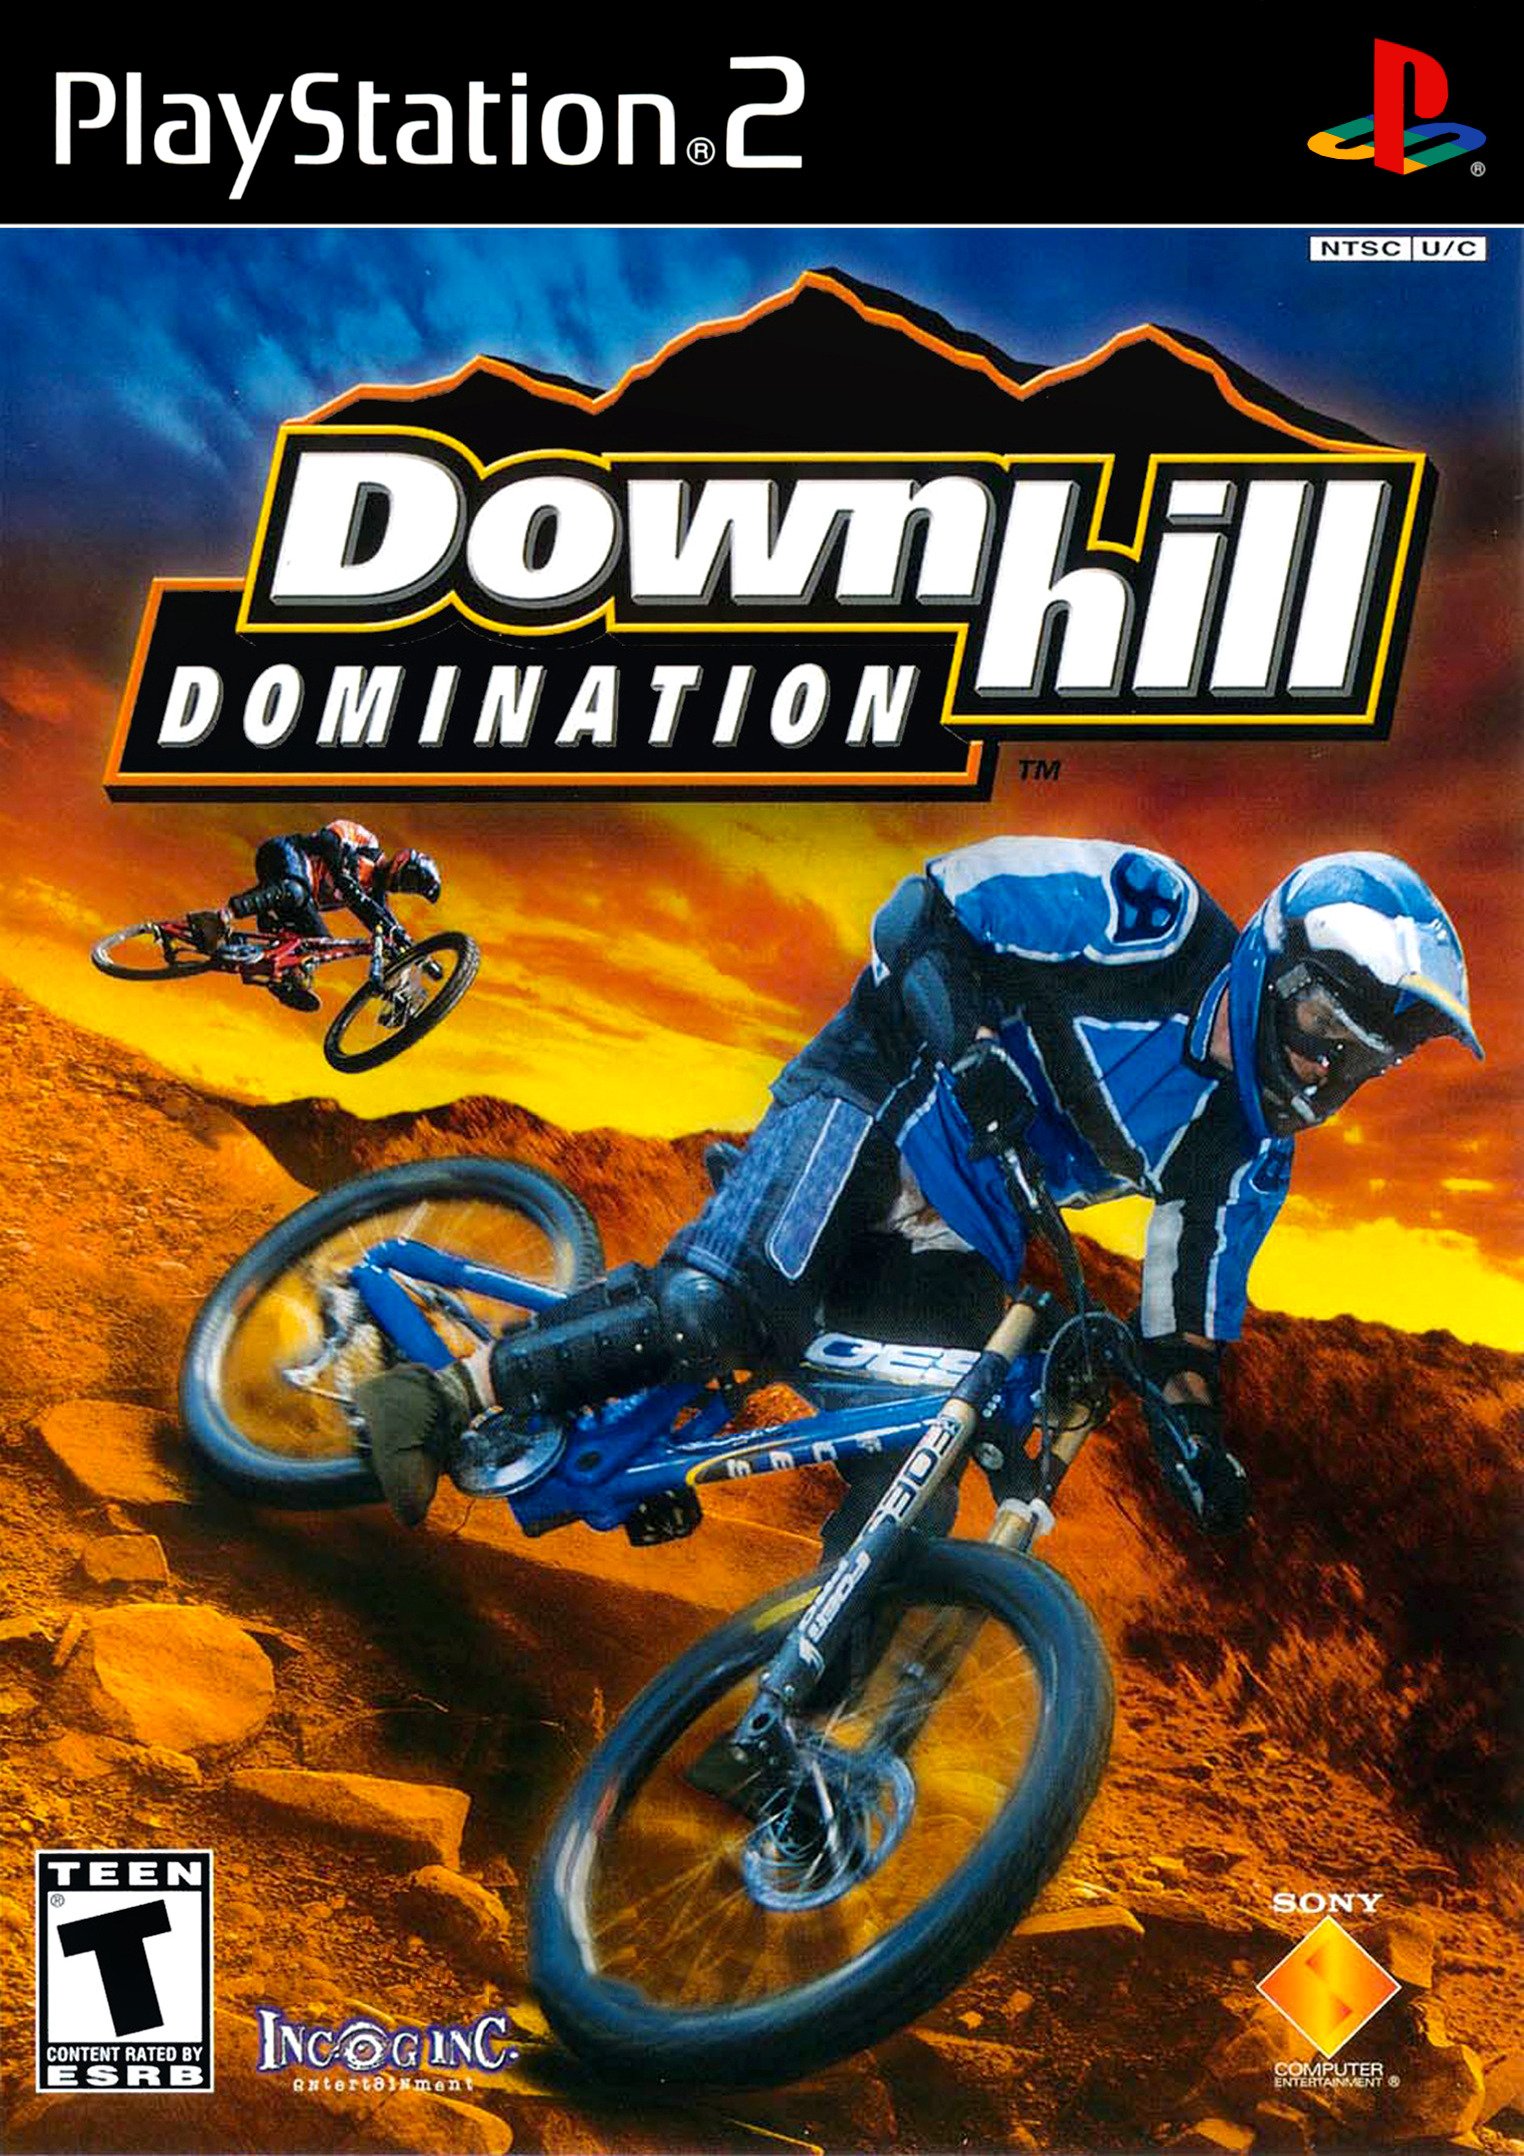 Downhill Domination screenshots, image and picture